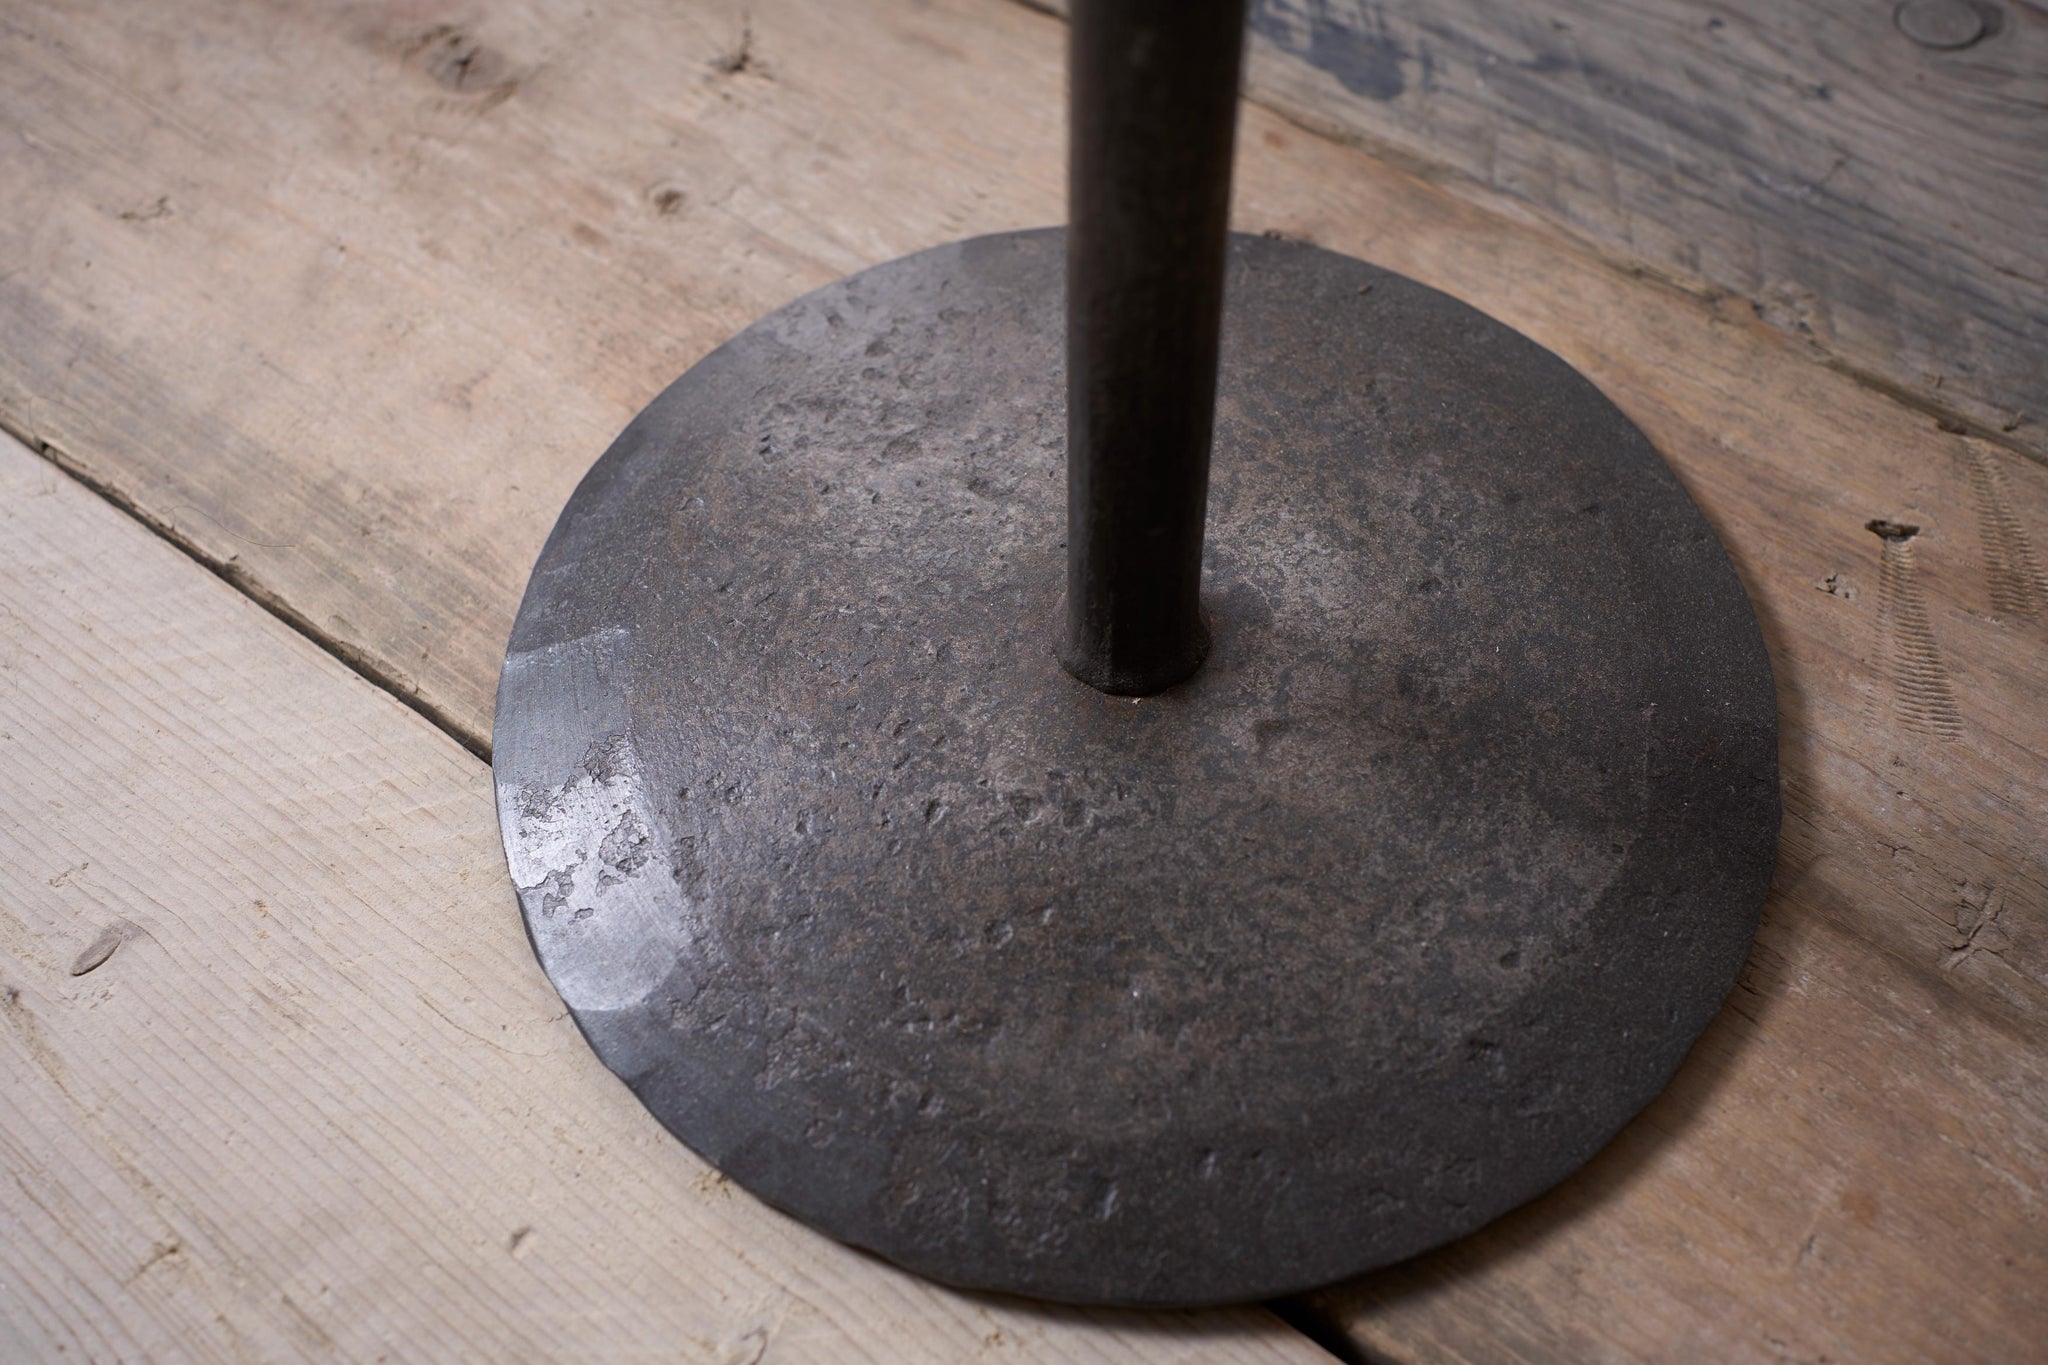 The 'Brokkr' forged steel martini table - Inverted